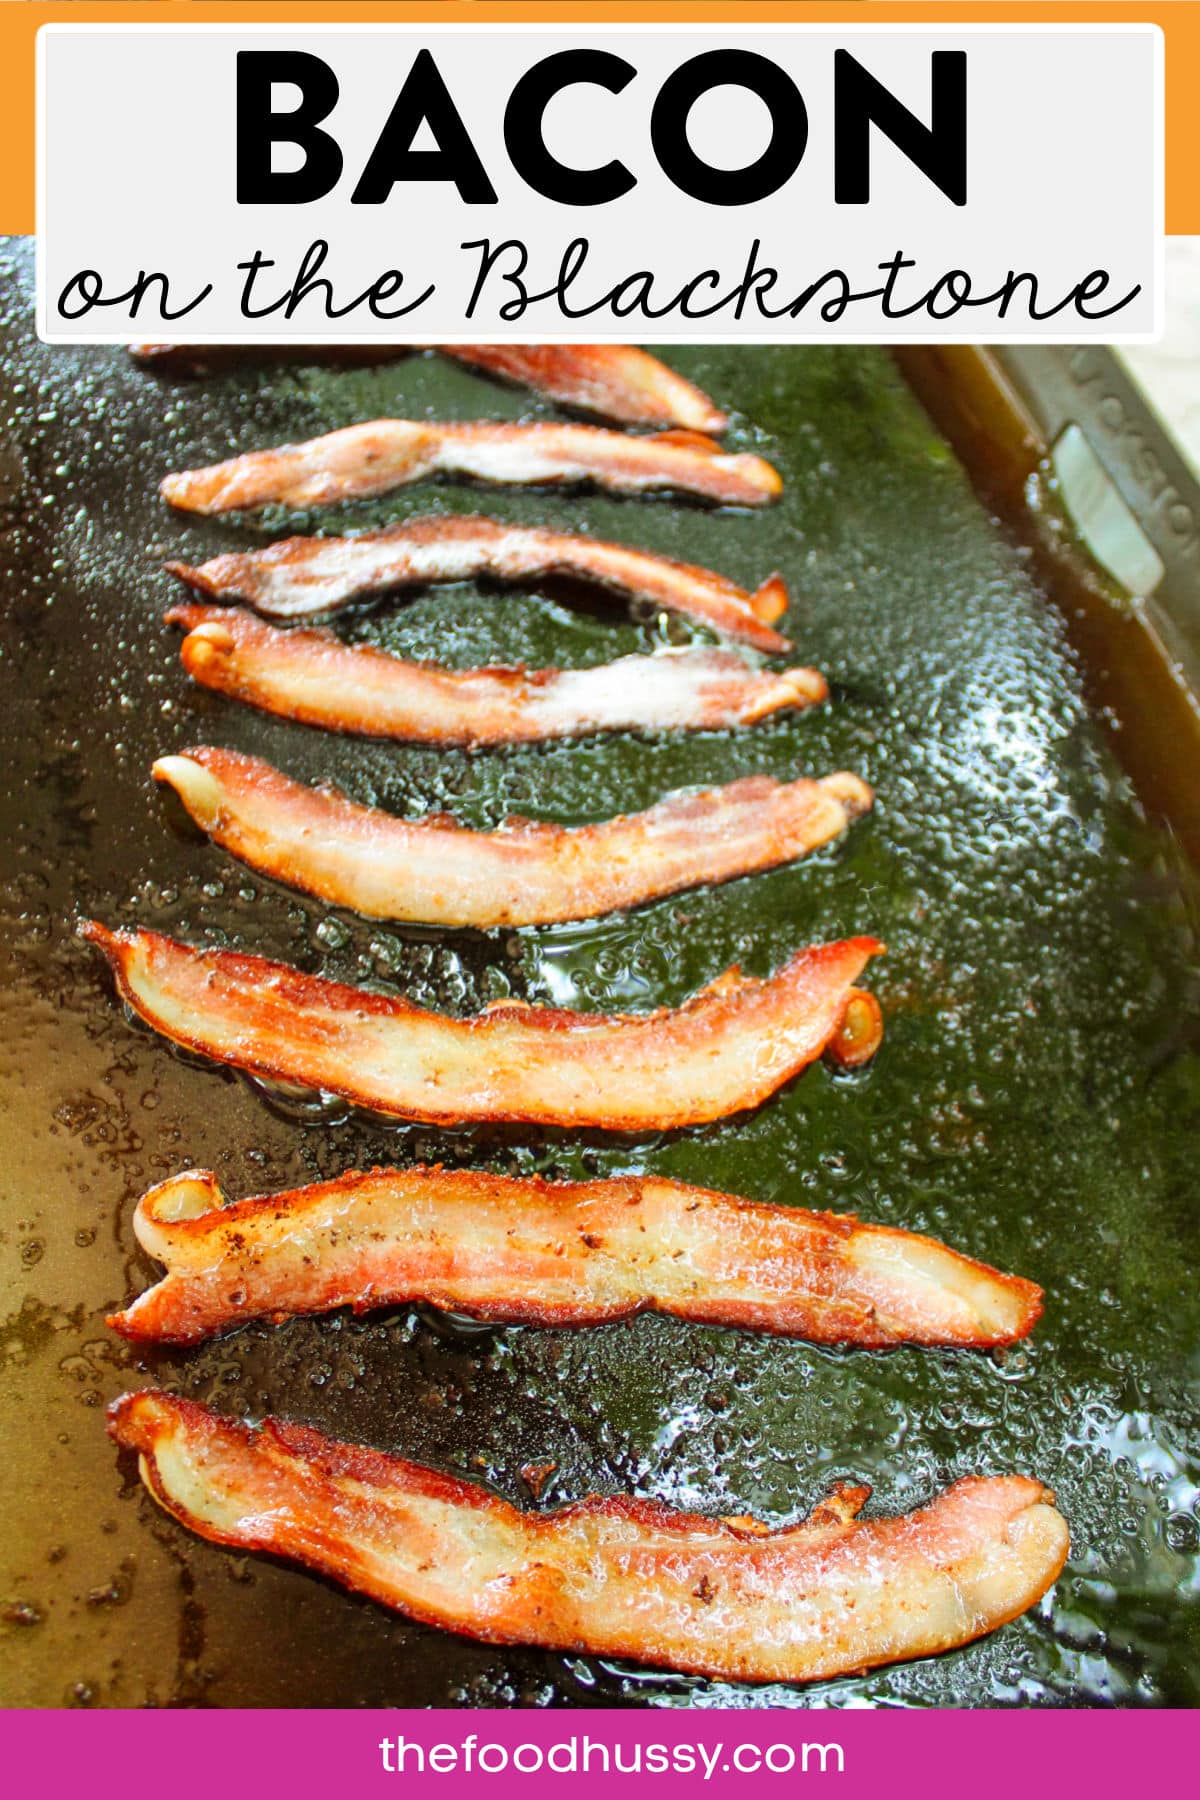 Making Bacon on the Blackstone is not only quick and easy but it captures all the flavor to make it taste perfect every time! Whether you like meaty bacon or crispy bacon - you'll have a plateful in less than 10 minutes!  via @foodhussy